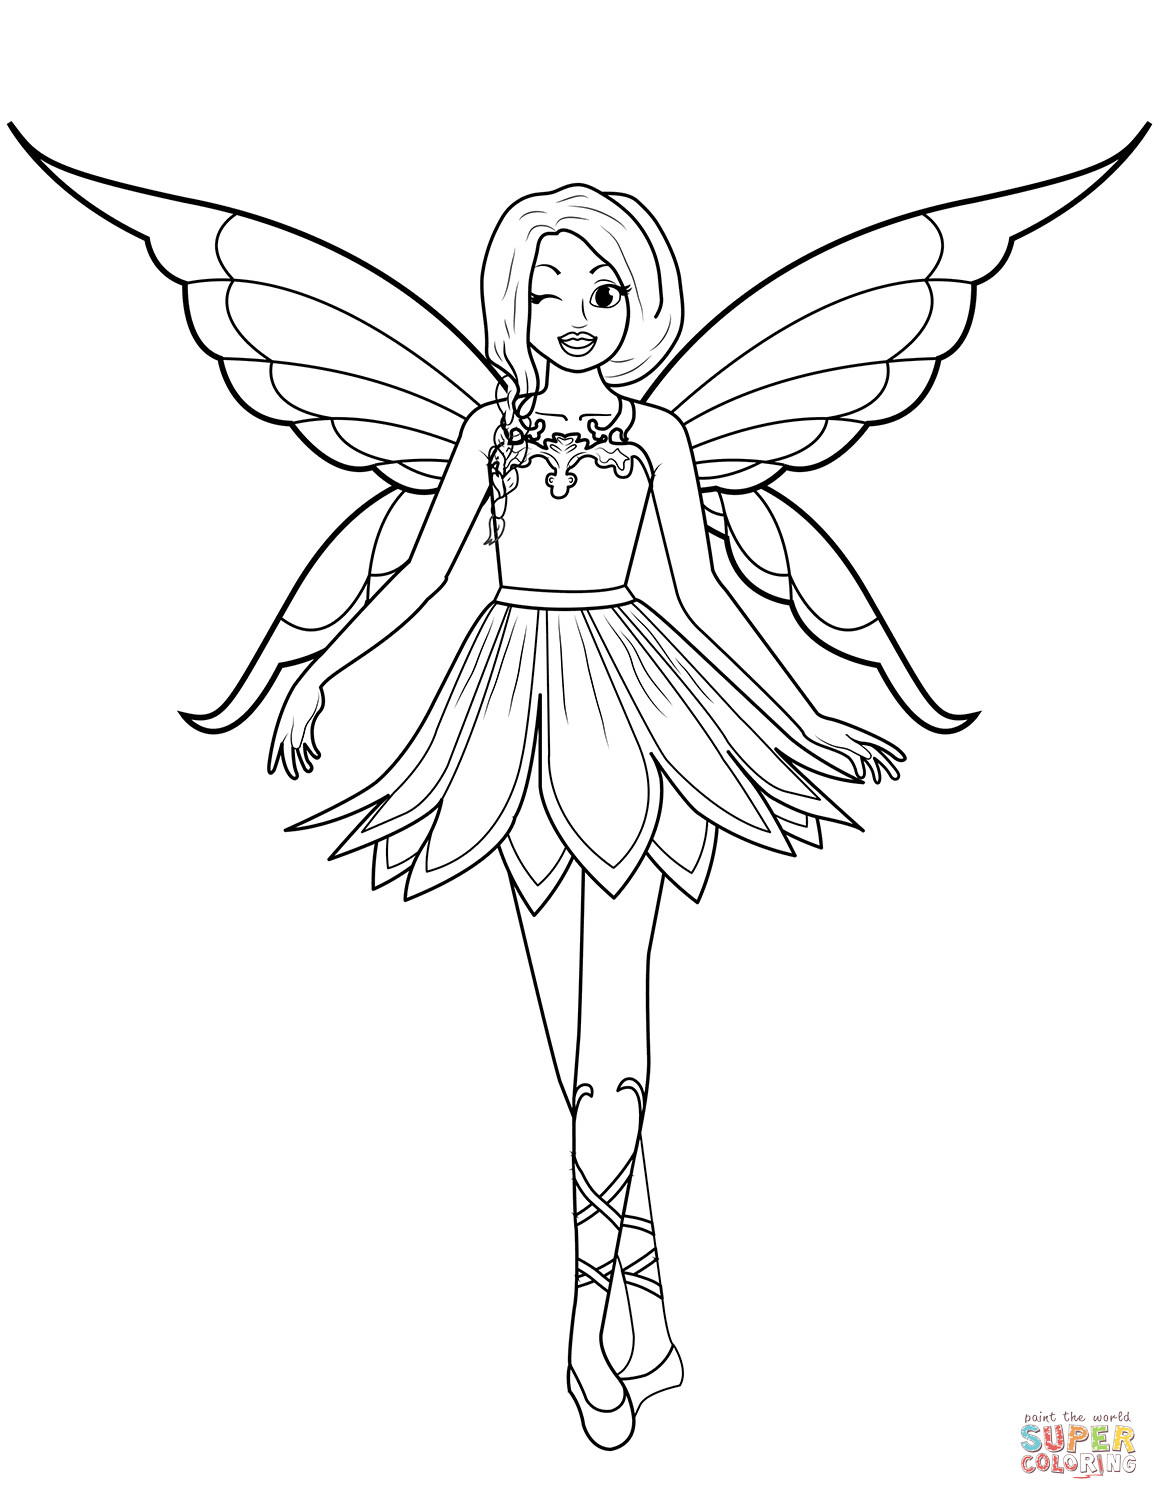 Fairy Coloring Sheet
 Winking Fairy coloring page